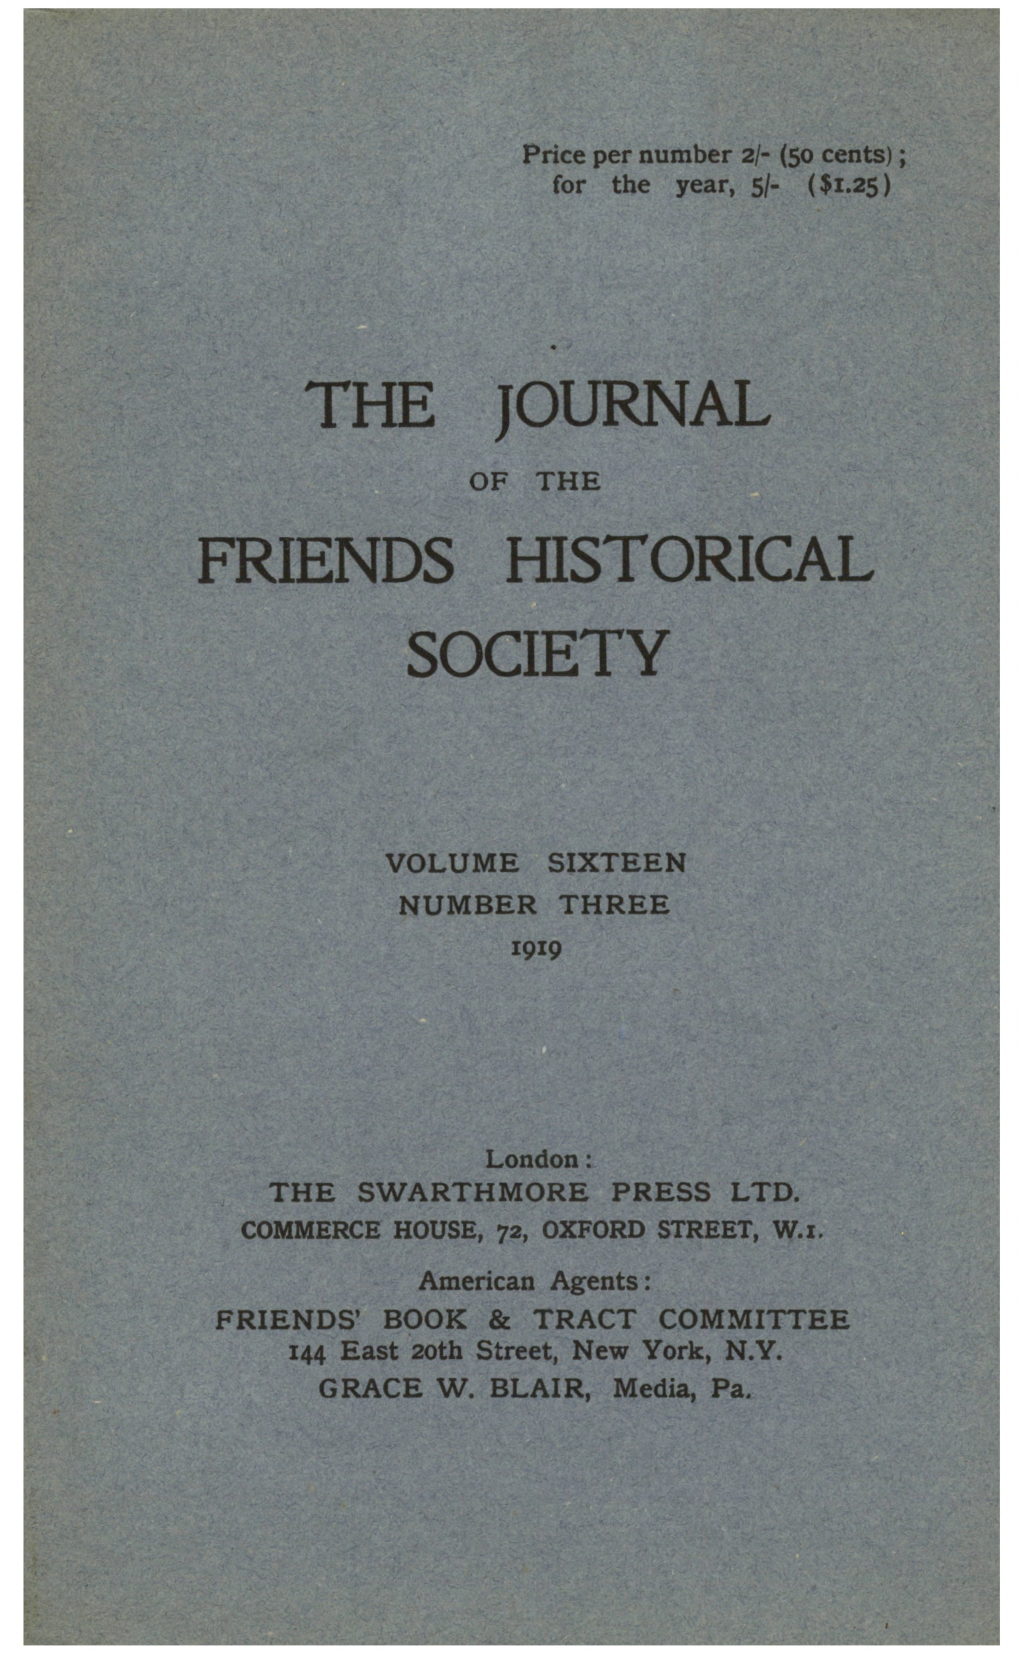 American Agents: FRIENDS' BOOK & TRACT COMMITTEE 144 East 20Th Street, New York, N.Y